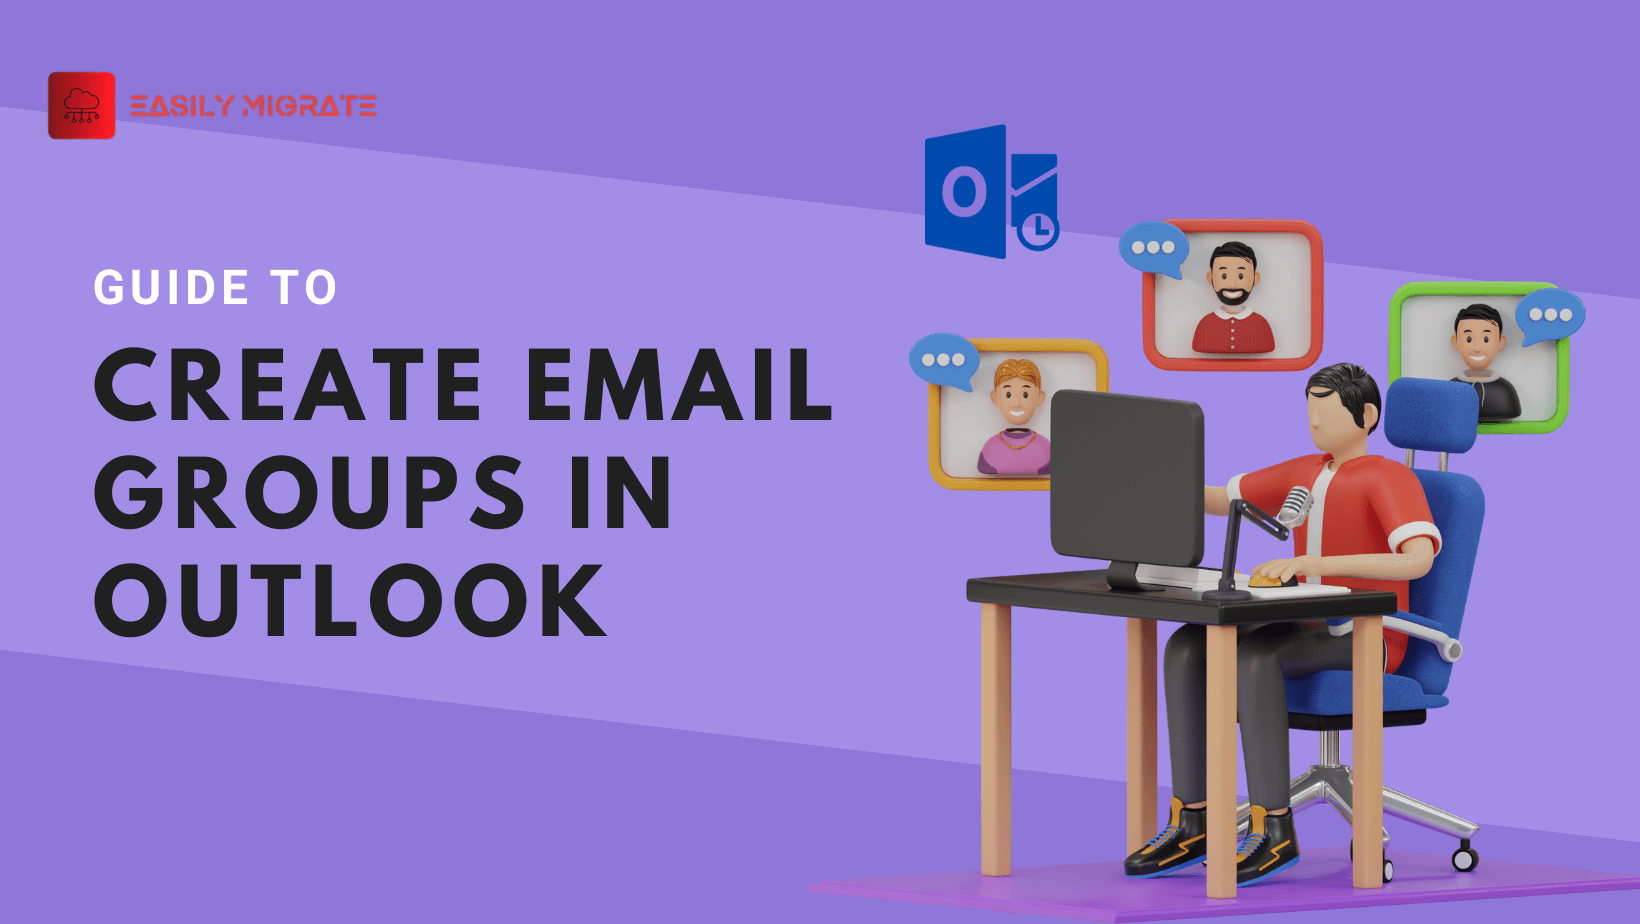 A Step-by-Step Guide to Create Email Groups in Outlook